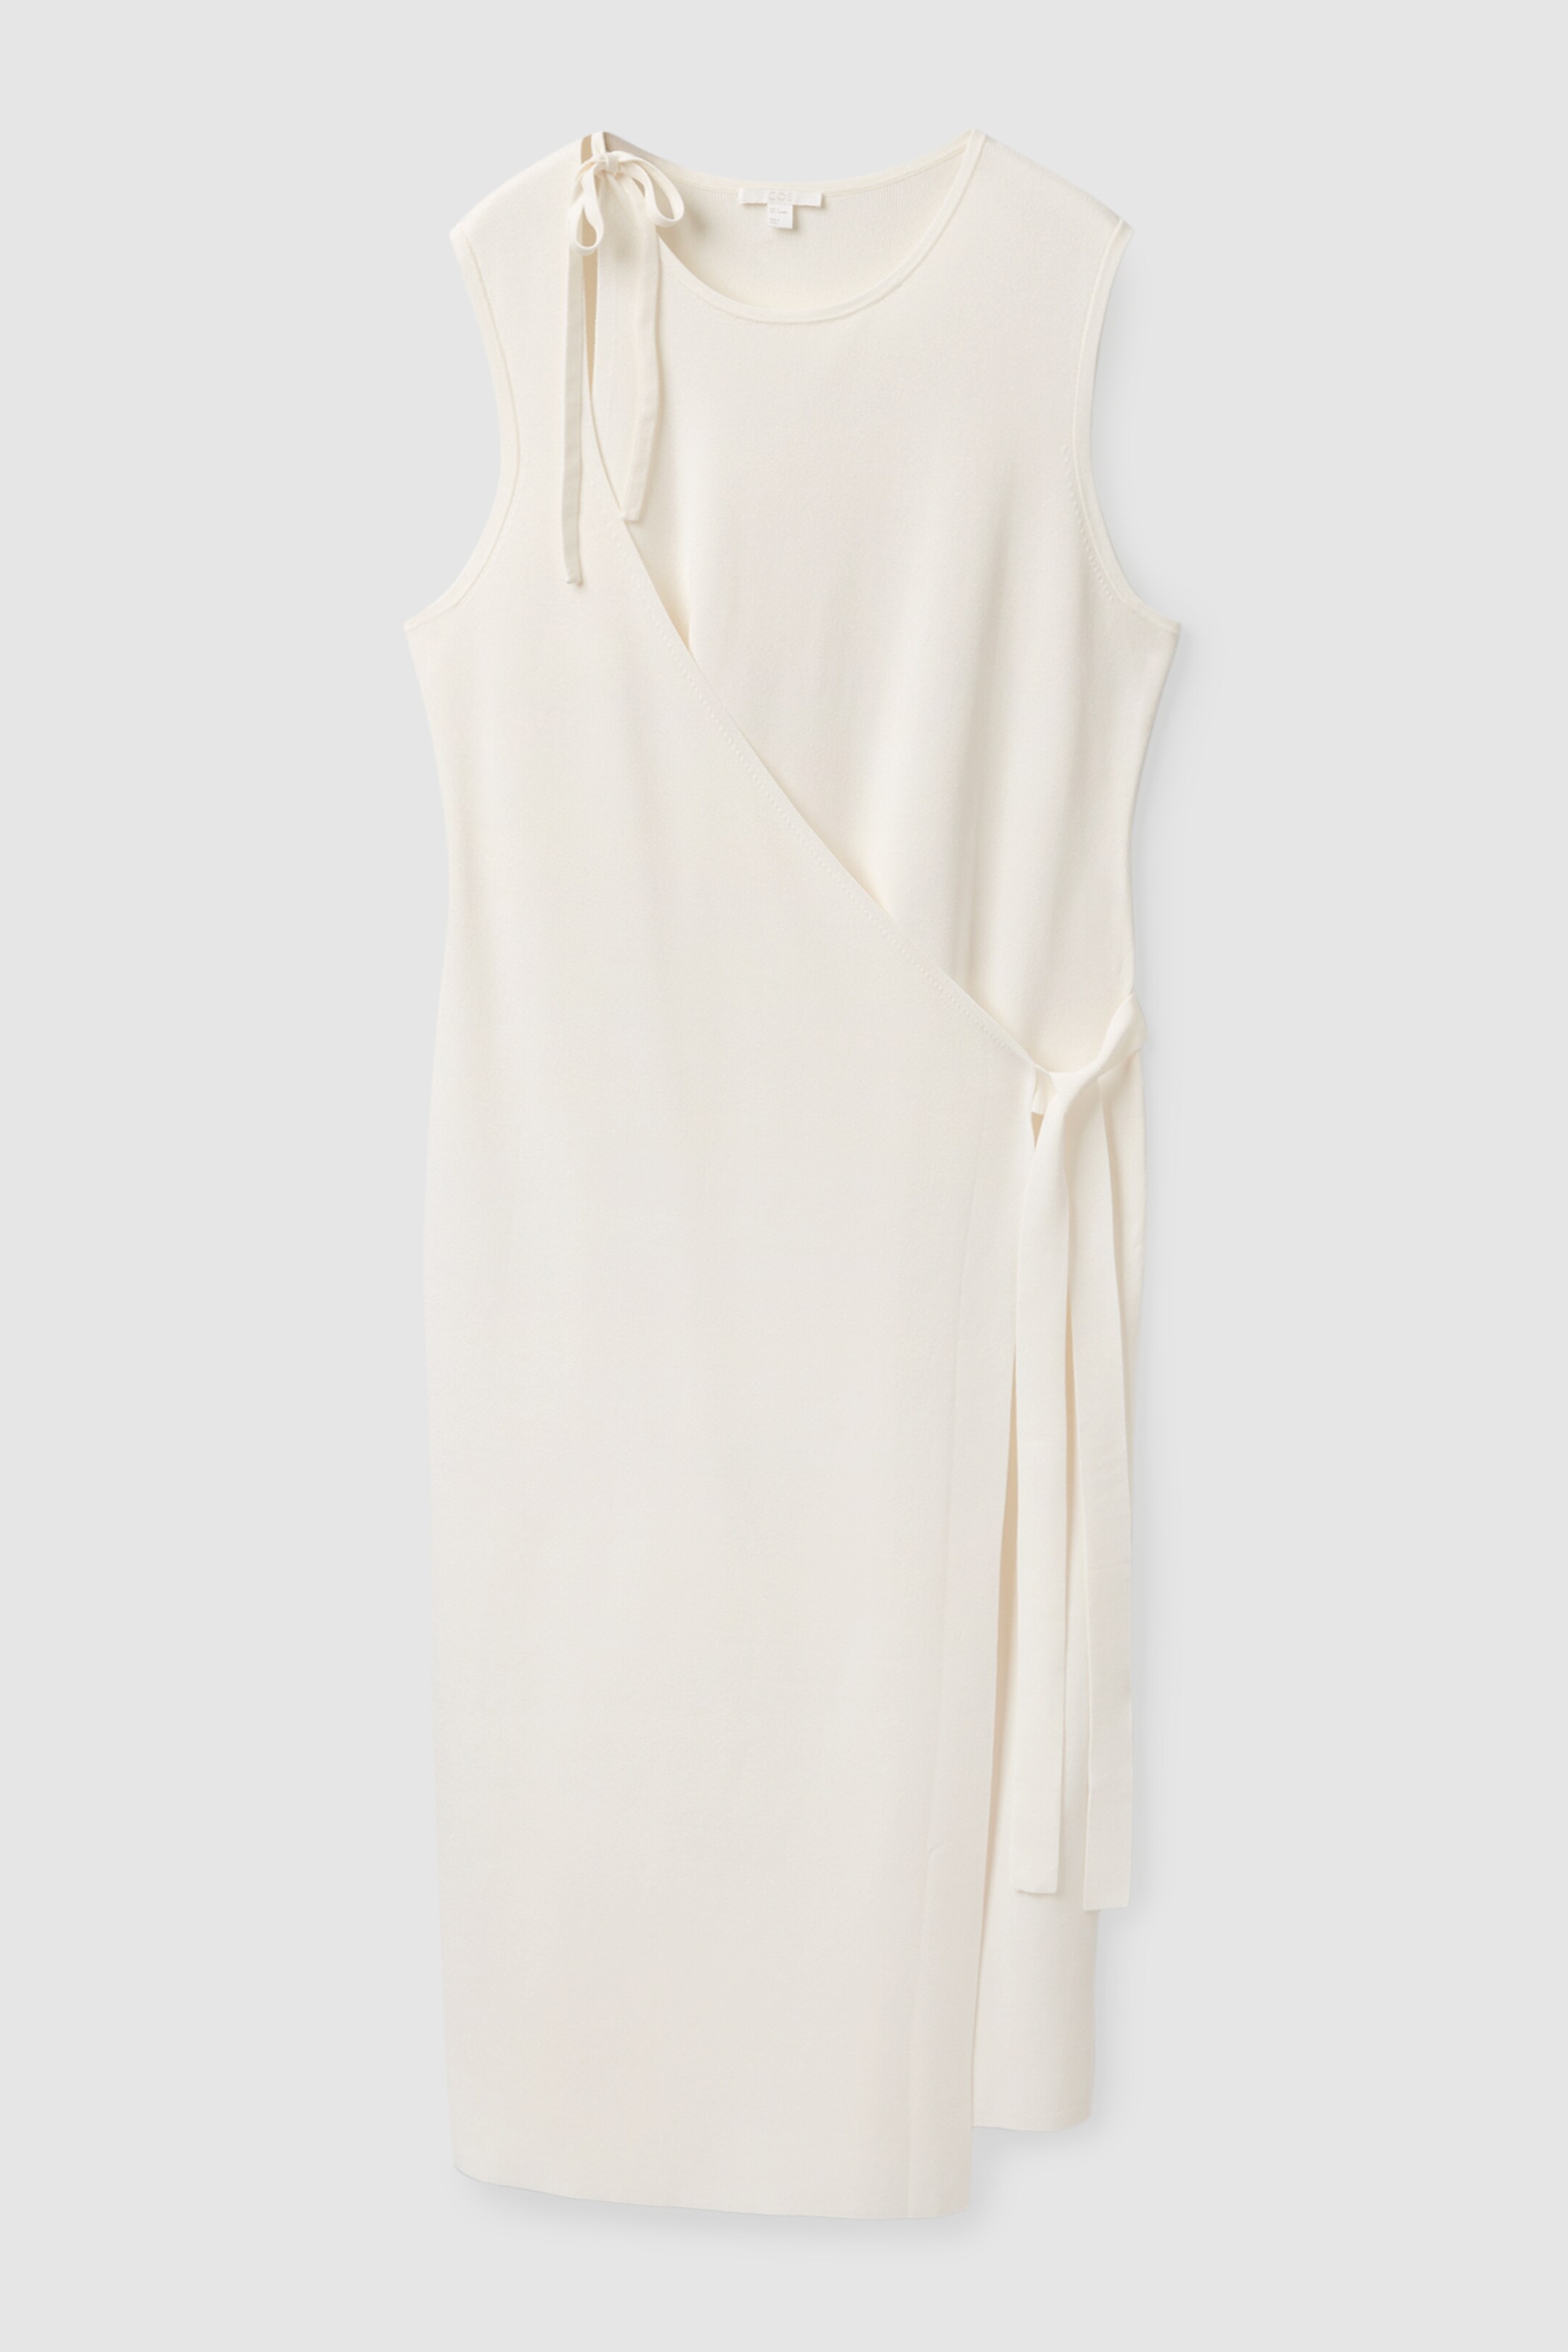 Front image of cos SLEEVELESS WRAP DRESS in off-white